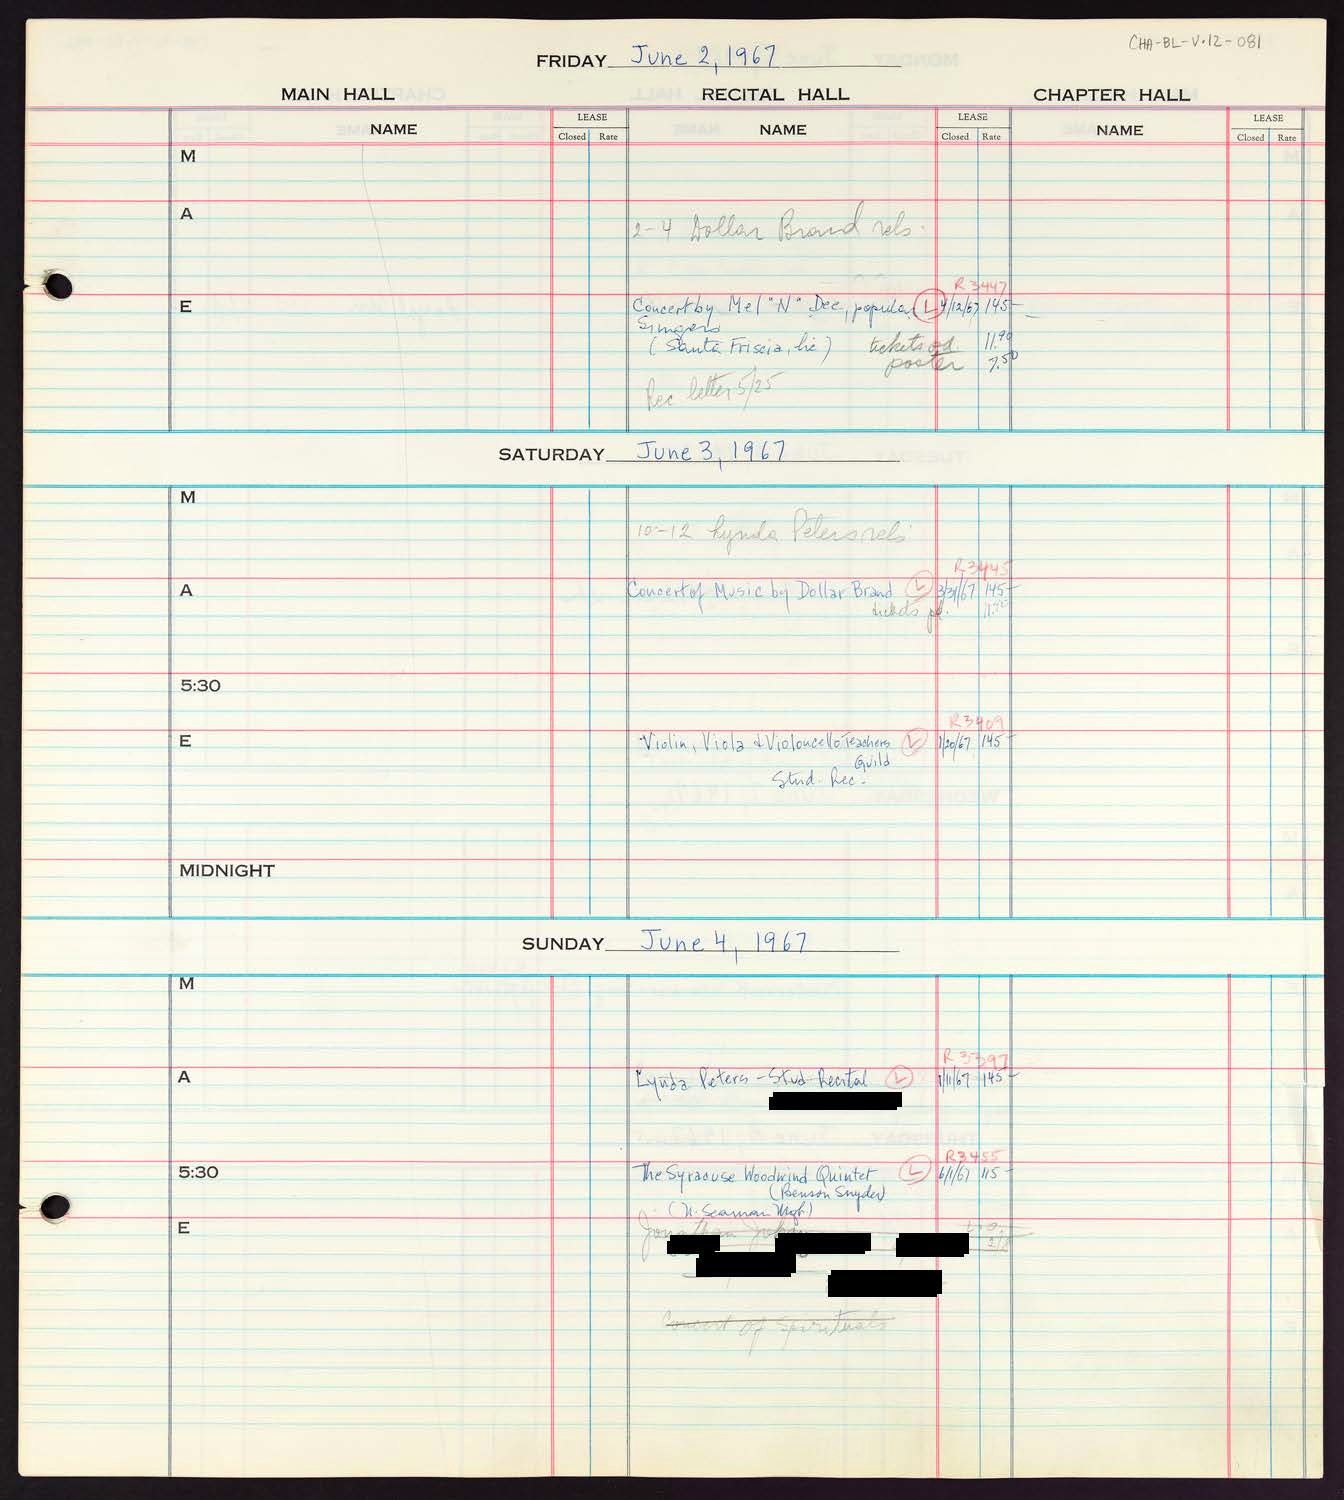 Carnegie Hall Booking Ledger, volume 12, page 81